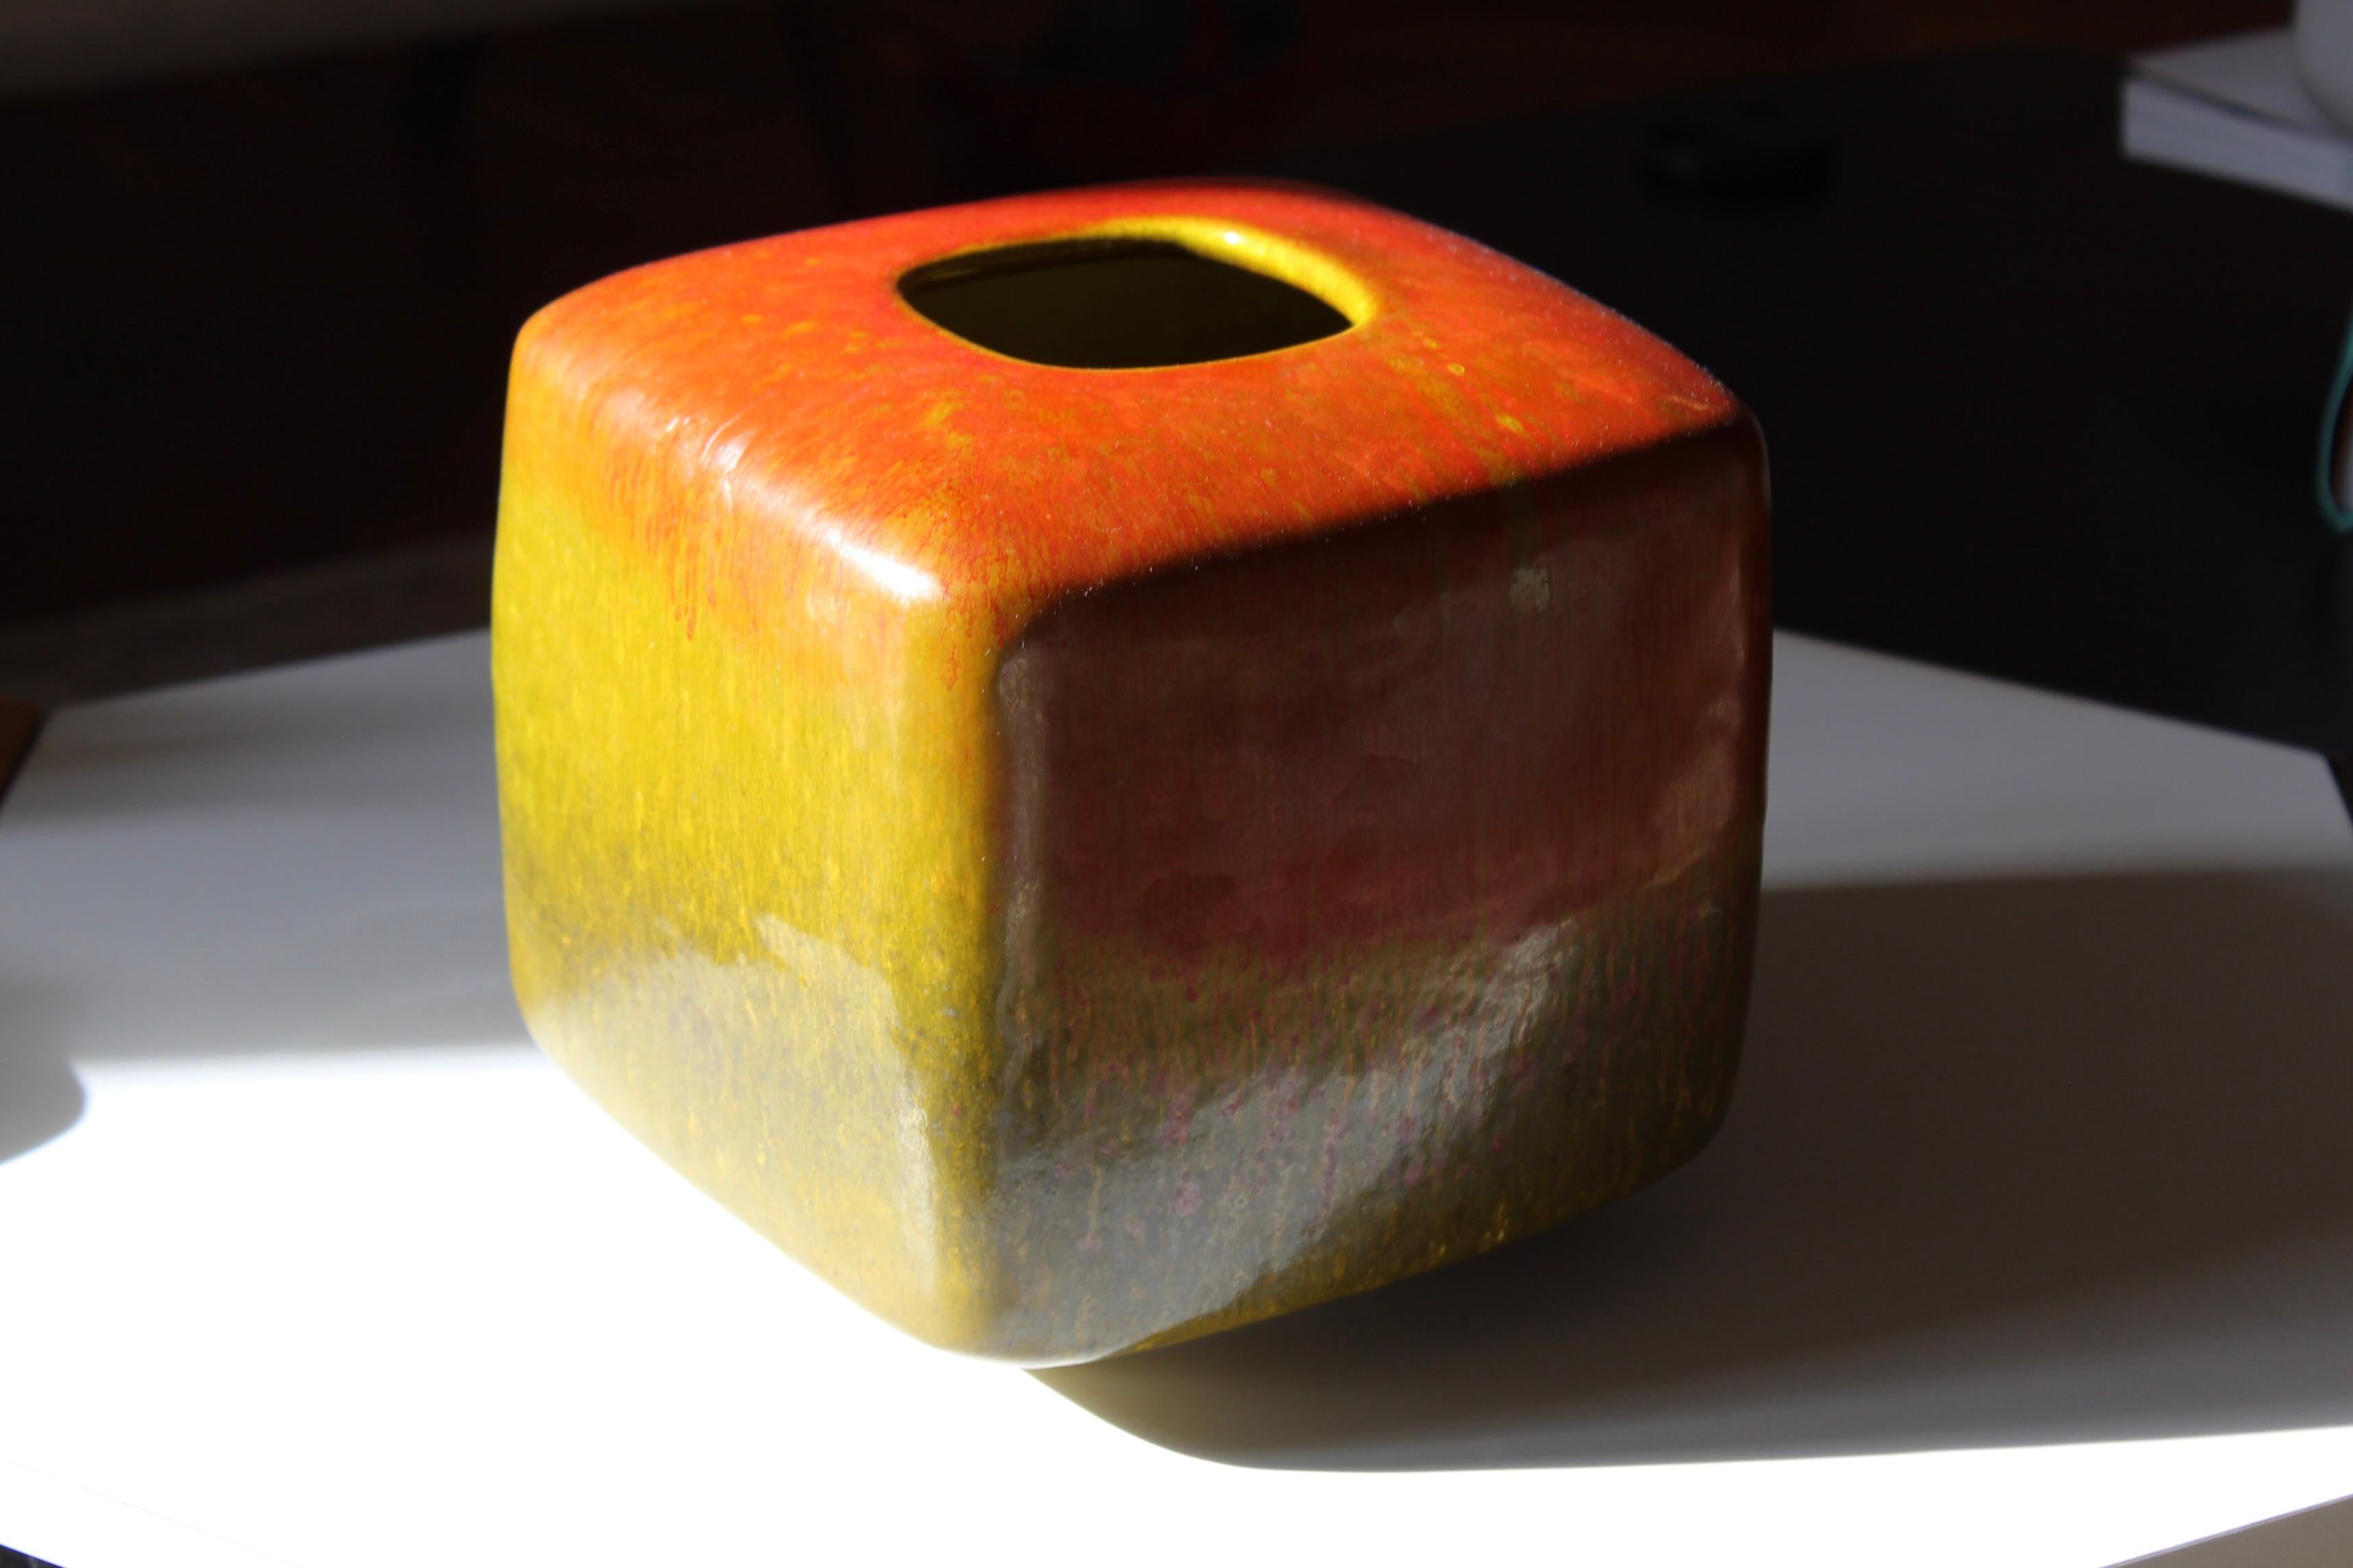 A unique red and yellow-glazed ceramic vase designed and exectuted by Alessio Tasca. The vase is produced in the studio of the artist and features a highly artistic glaze.